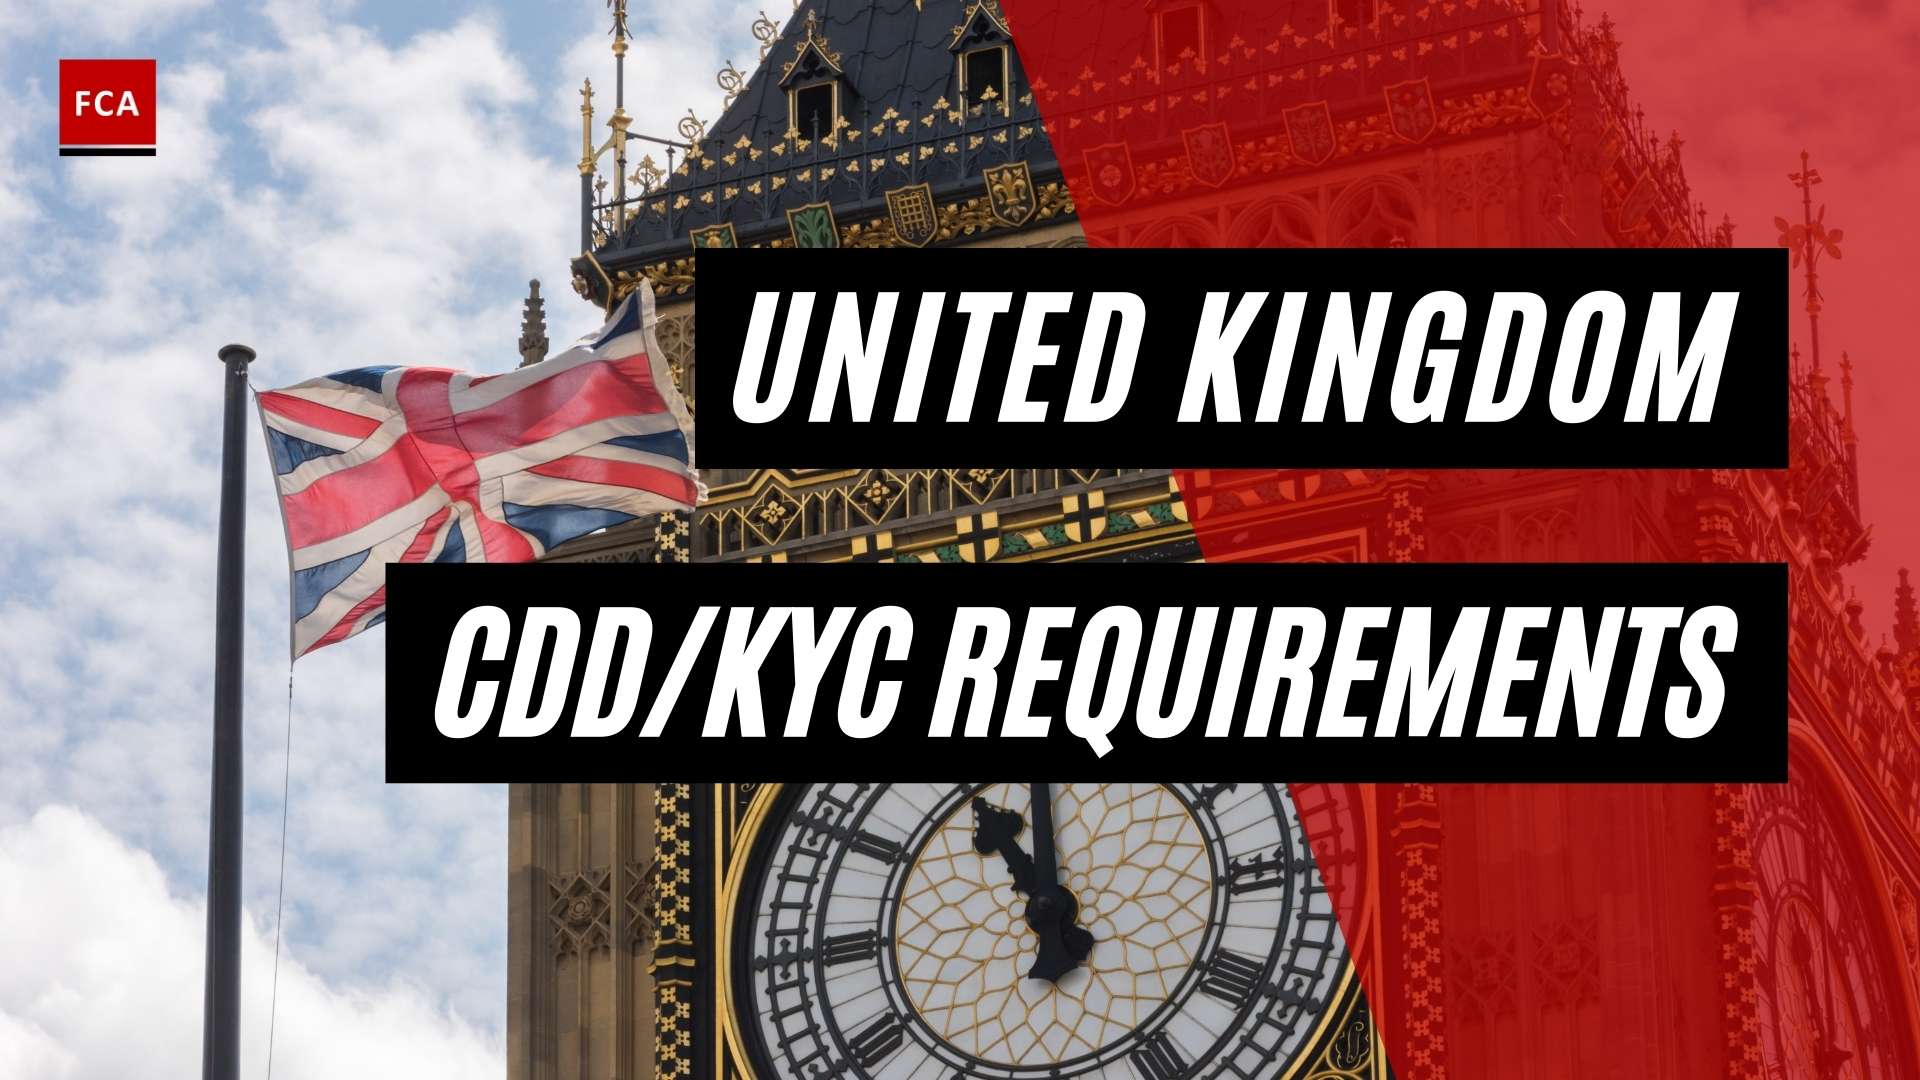 Overview Of Key Regulation And Cdd And Kyc Requirements In The United Kingdom - Featured Image